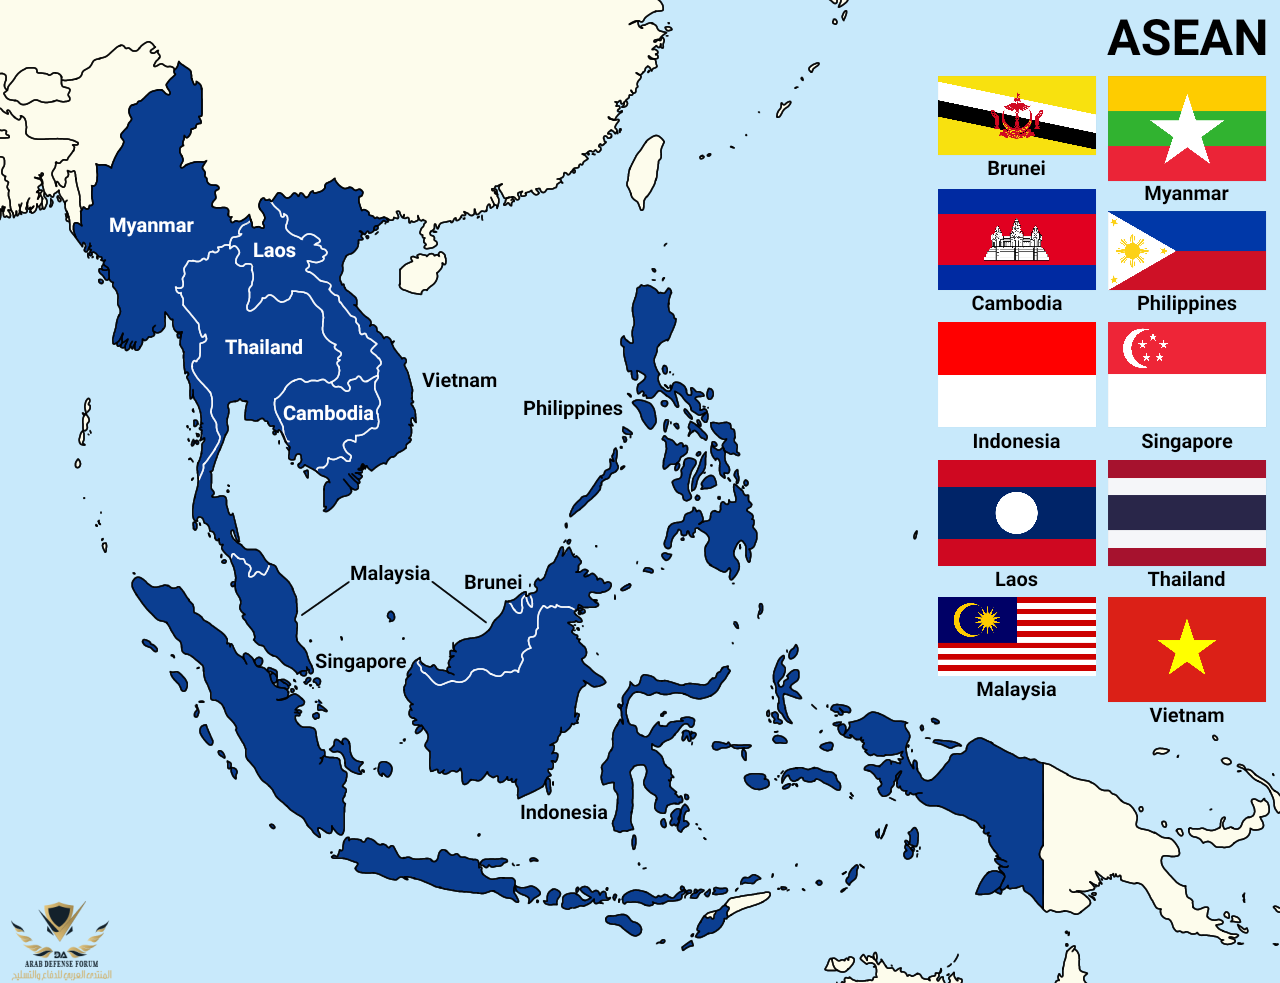 Map_and_flag_of_ASEAN_countries.png